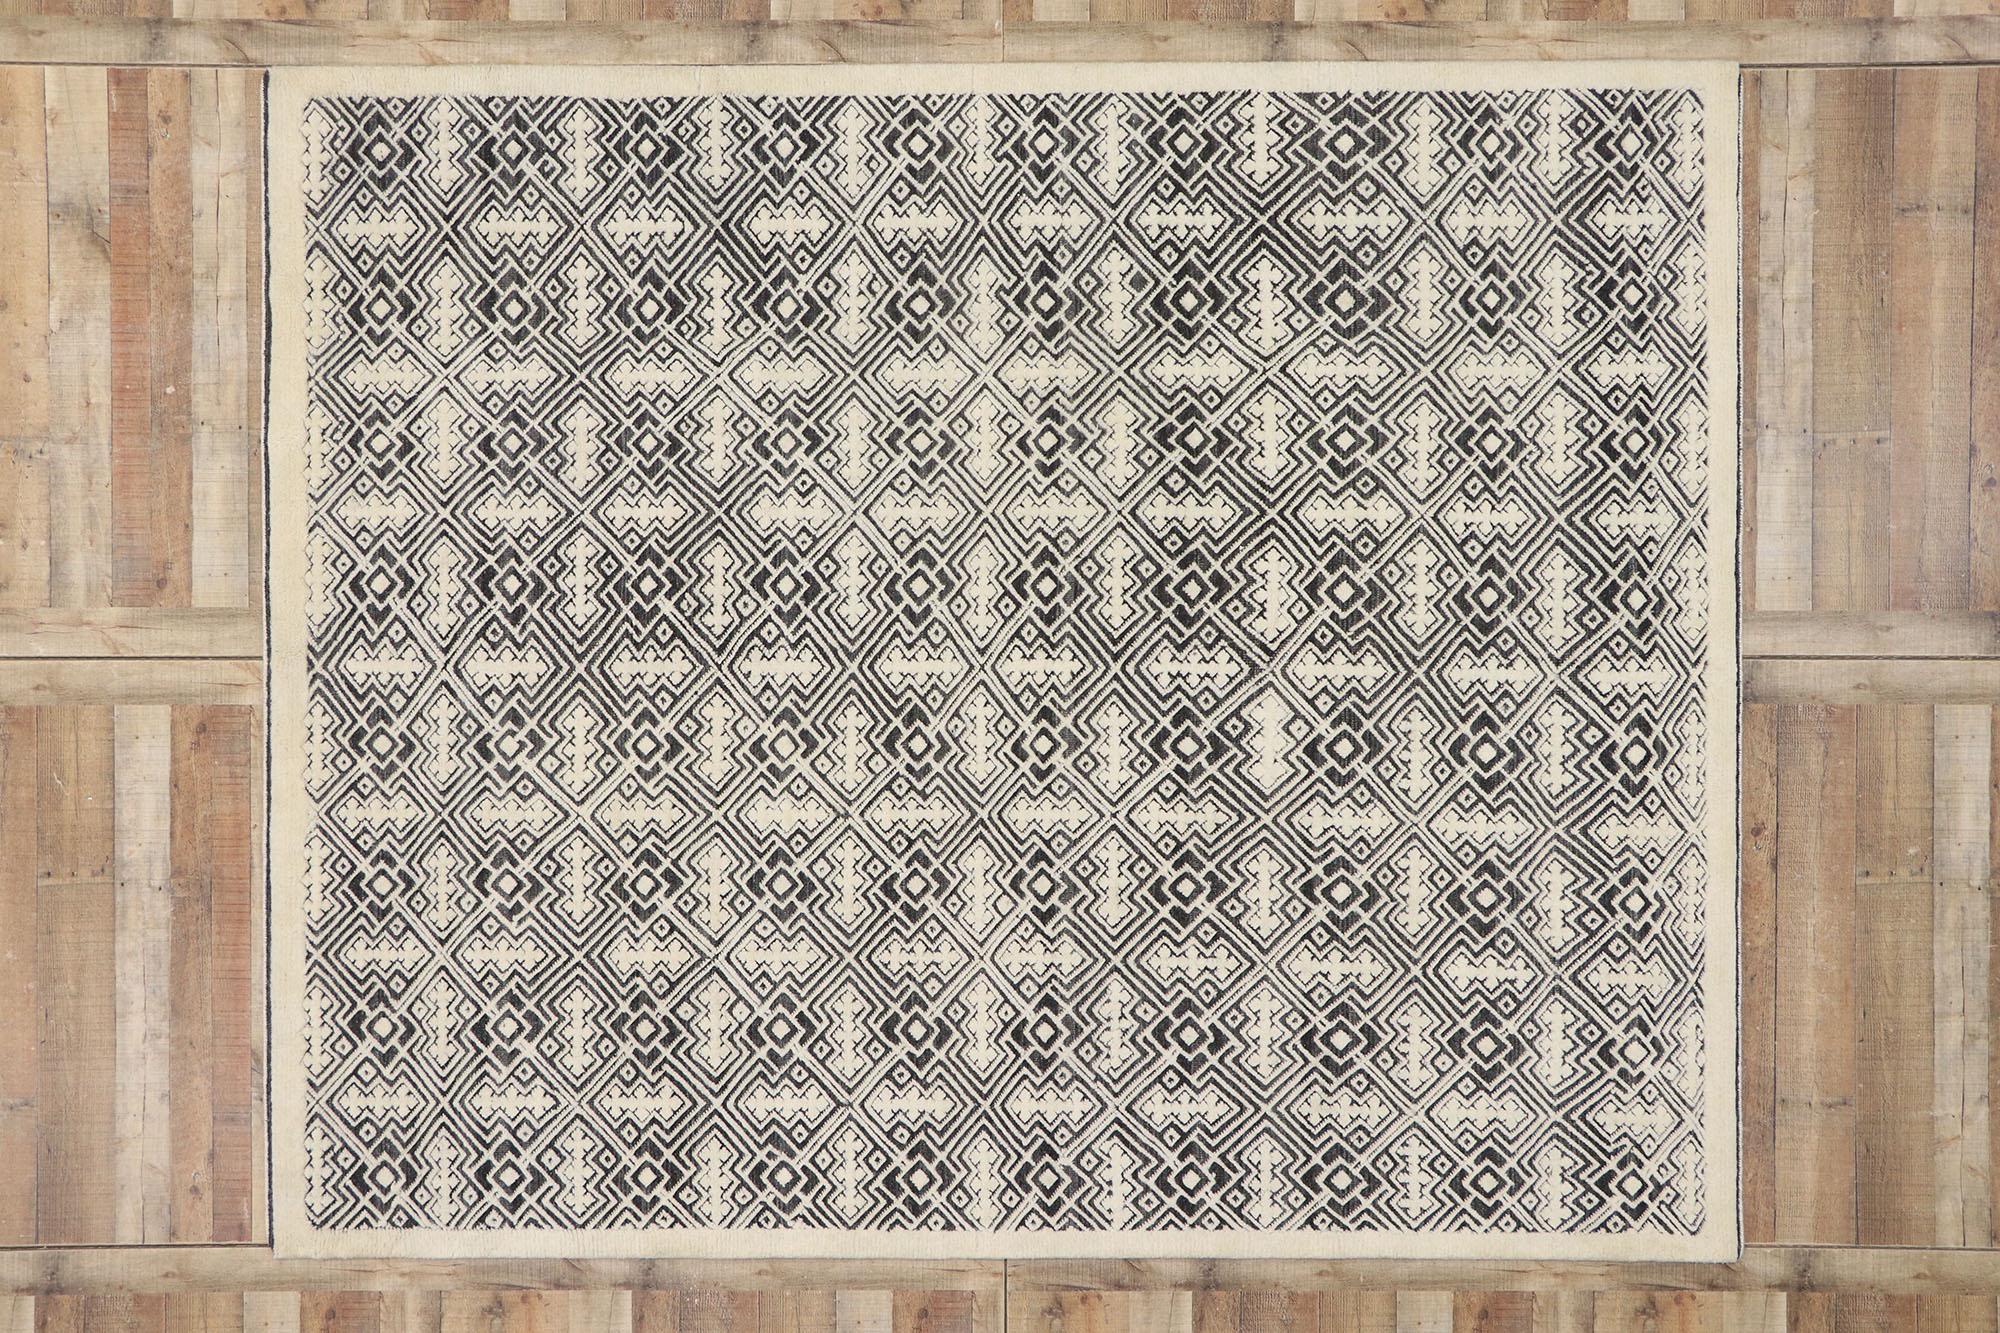 30614, new contemporary Moroccan Style Souf rug with raised design and modern style. This hand knotted wool new contemporary Moroccan Style Souf rug features a rectilinear pattern composed of interlocking geometric shapes overlaid upon a charcoal